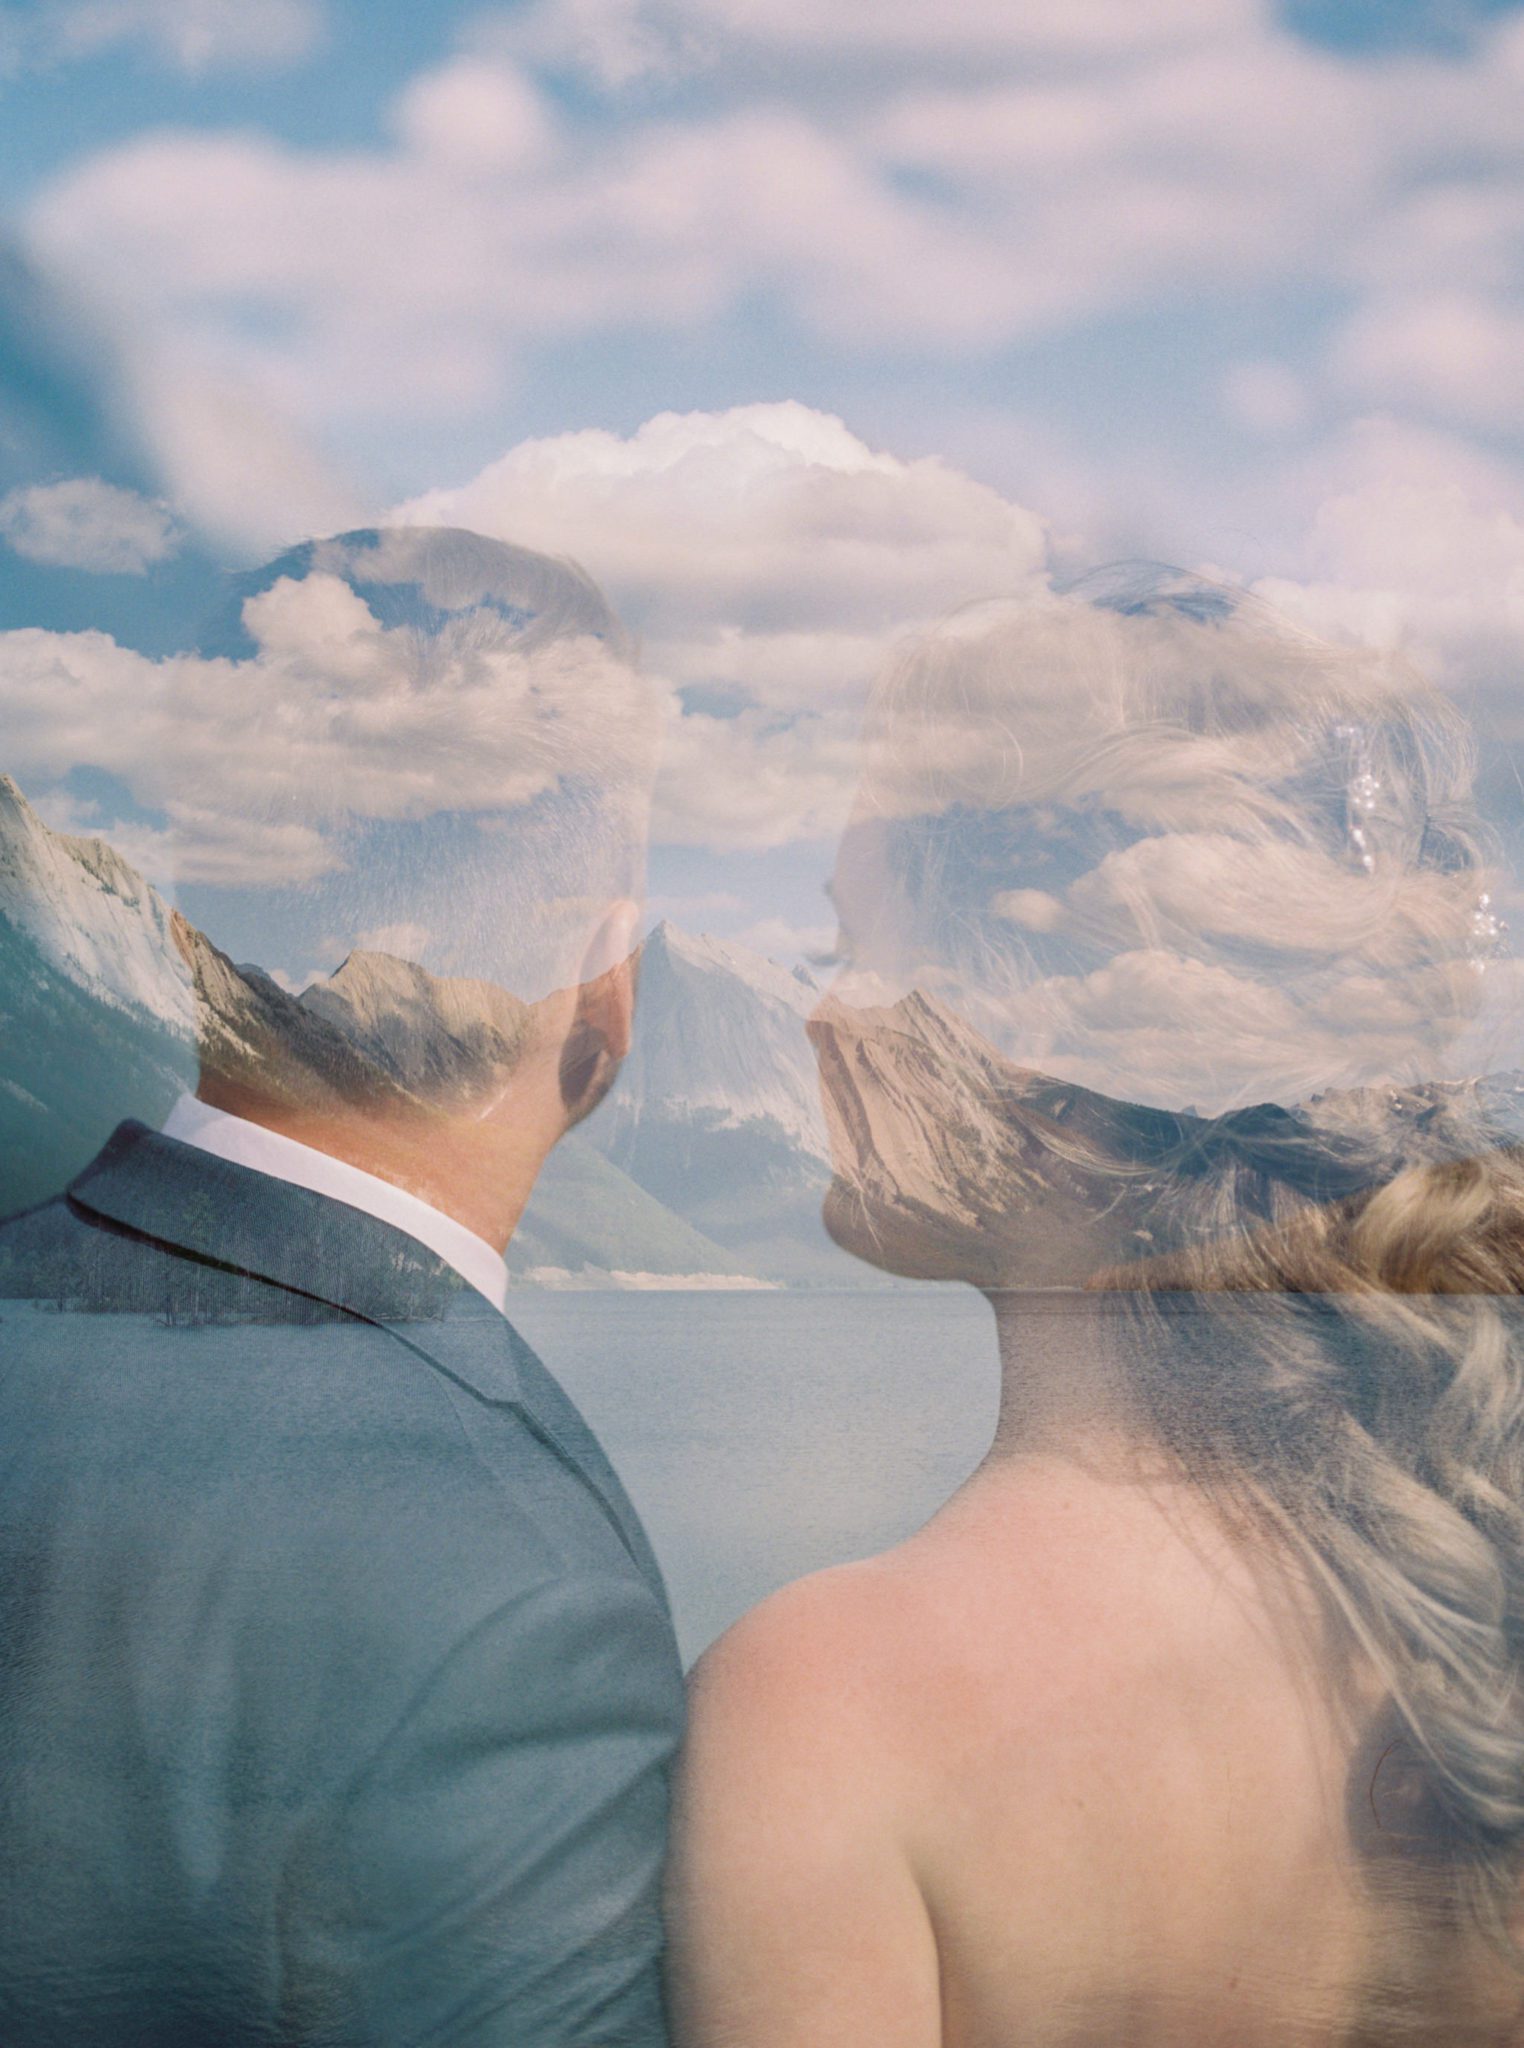 Double exposure wedding photography inspiration with bride and groom